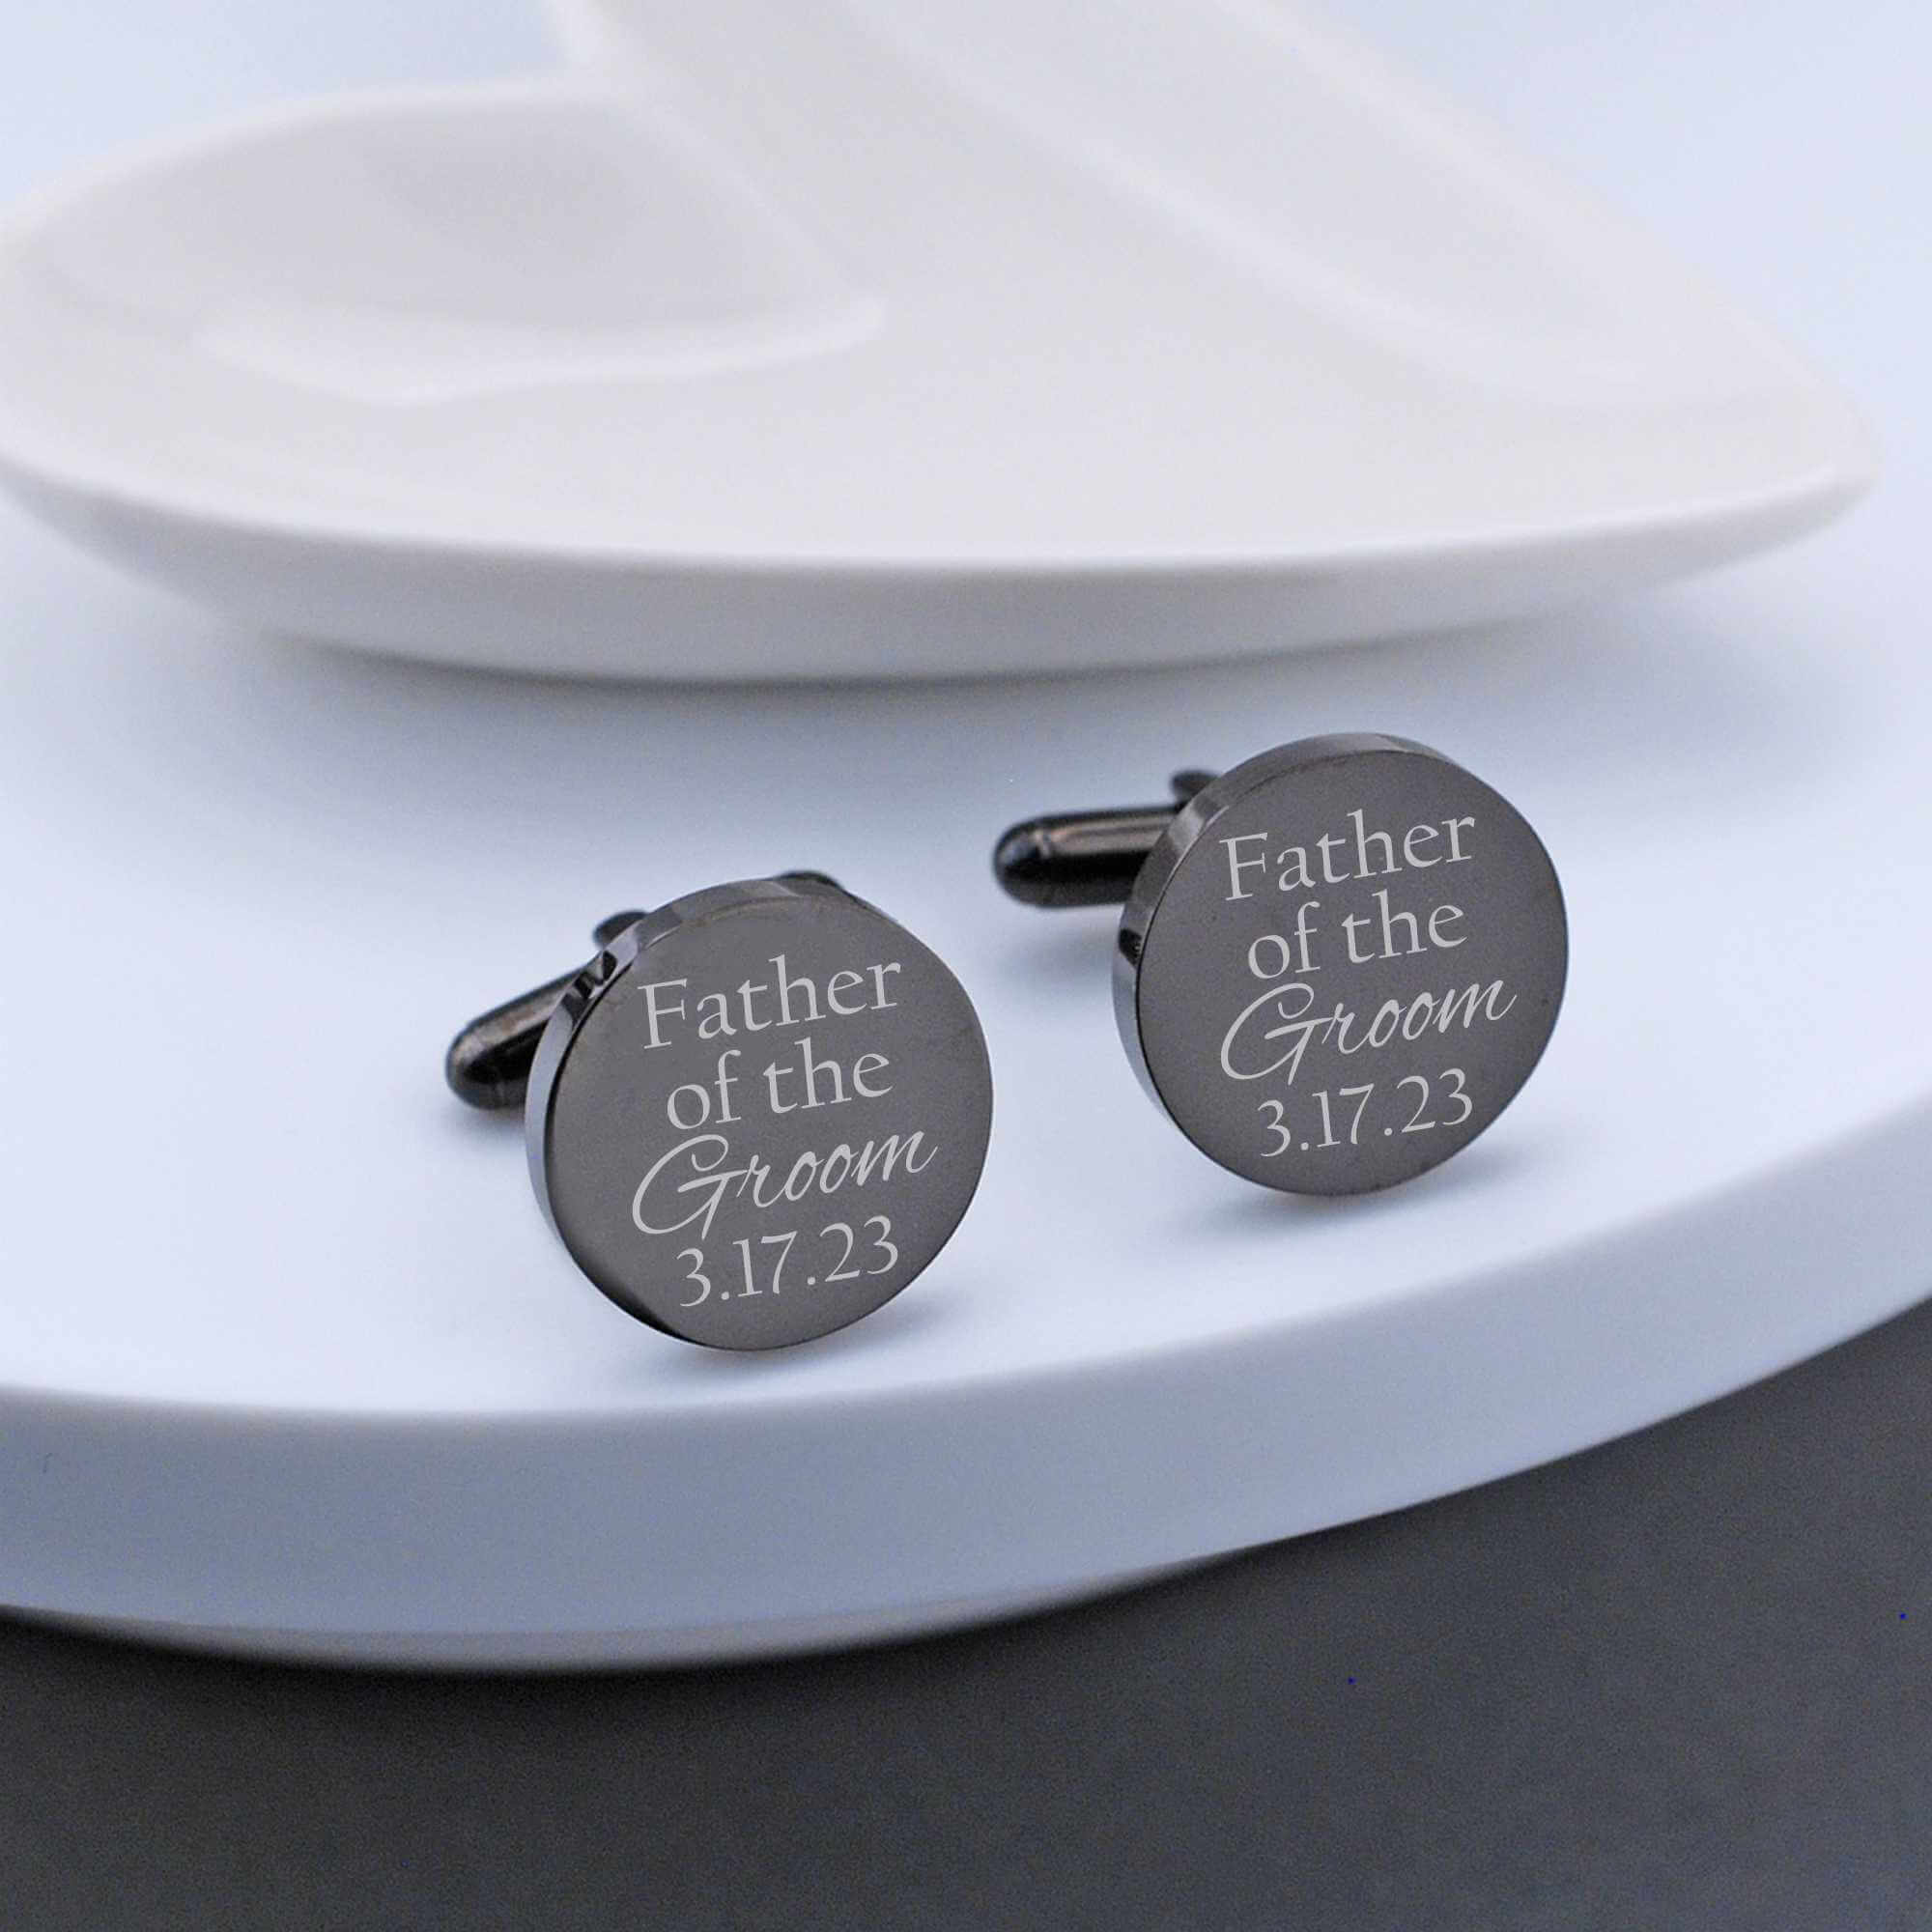 Father of the Groom Cufflinks